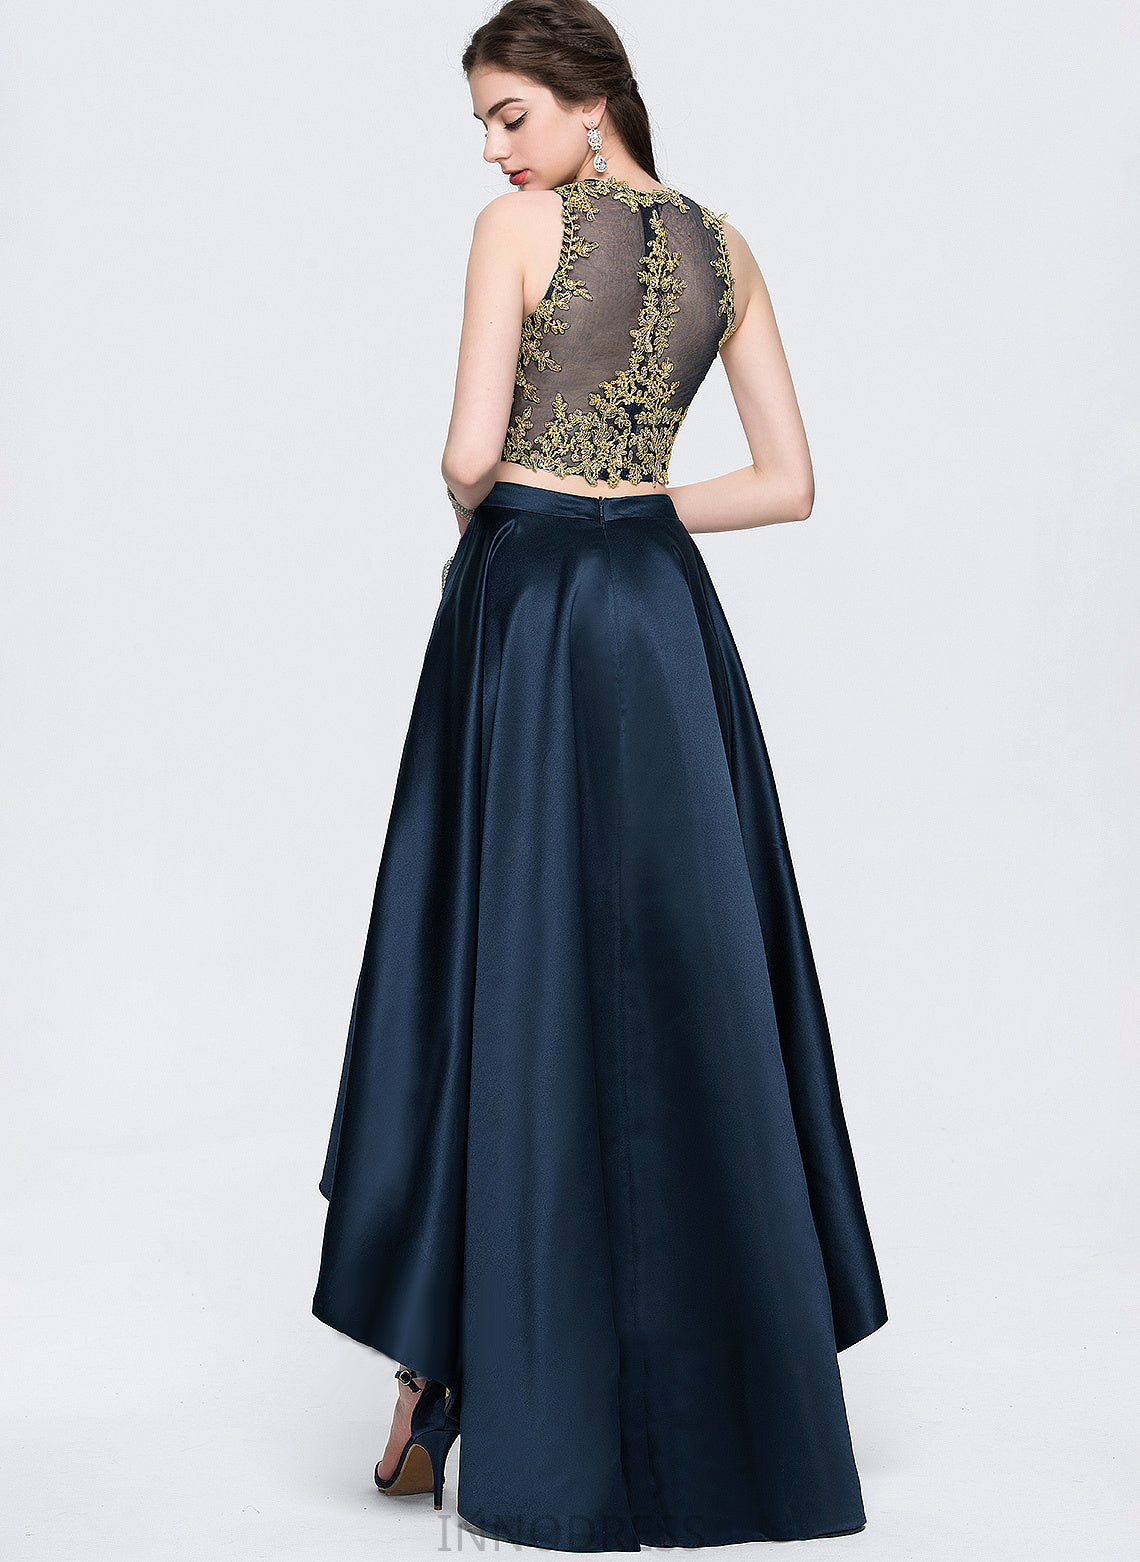 Asymmetrical Prom Dresses Lace Beading Neck Satin Sequins Jakayla With Scoop A-Line